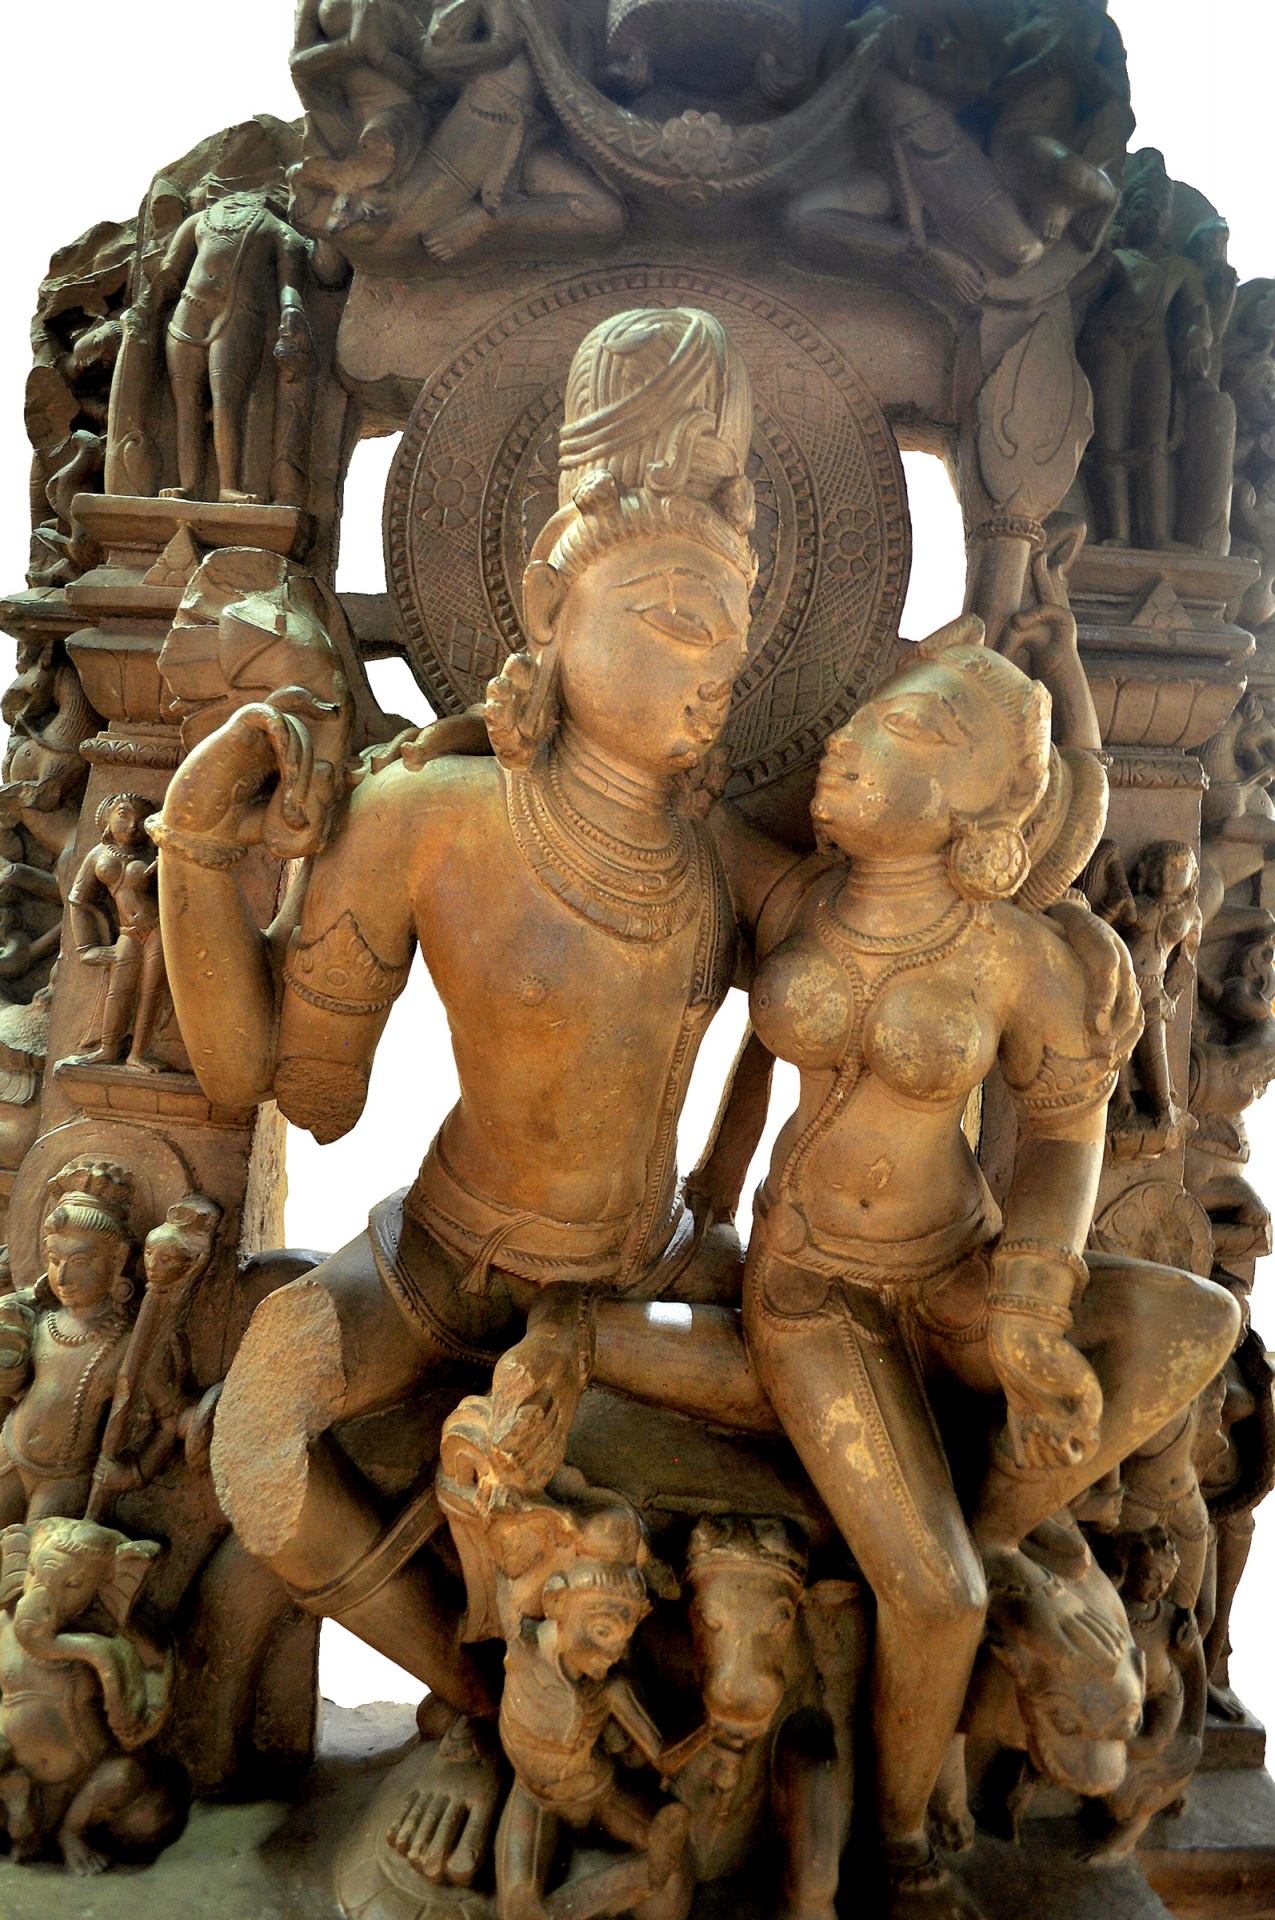 10th century sculpture of Lord Shiva and His wife